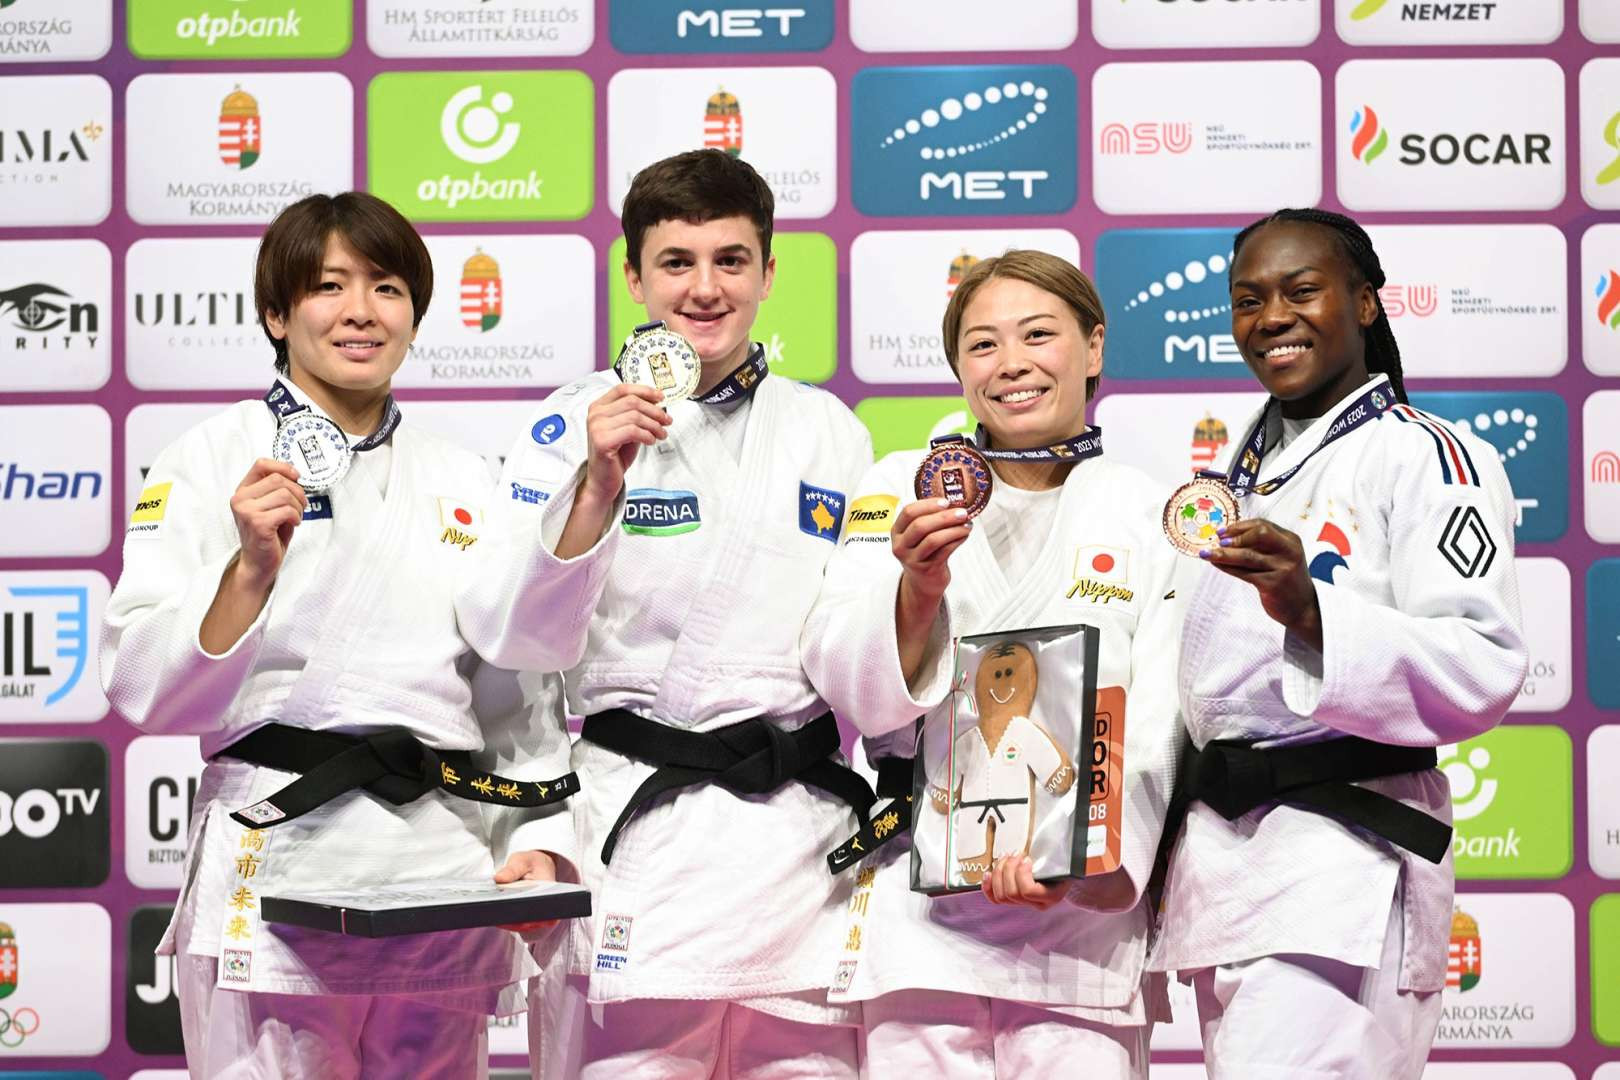 Kosovo's Laura Fazliu, second left, improved on last year's Judo World Masters silver with gold in Hungary ©IJF